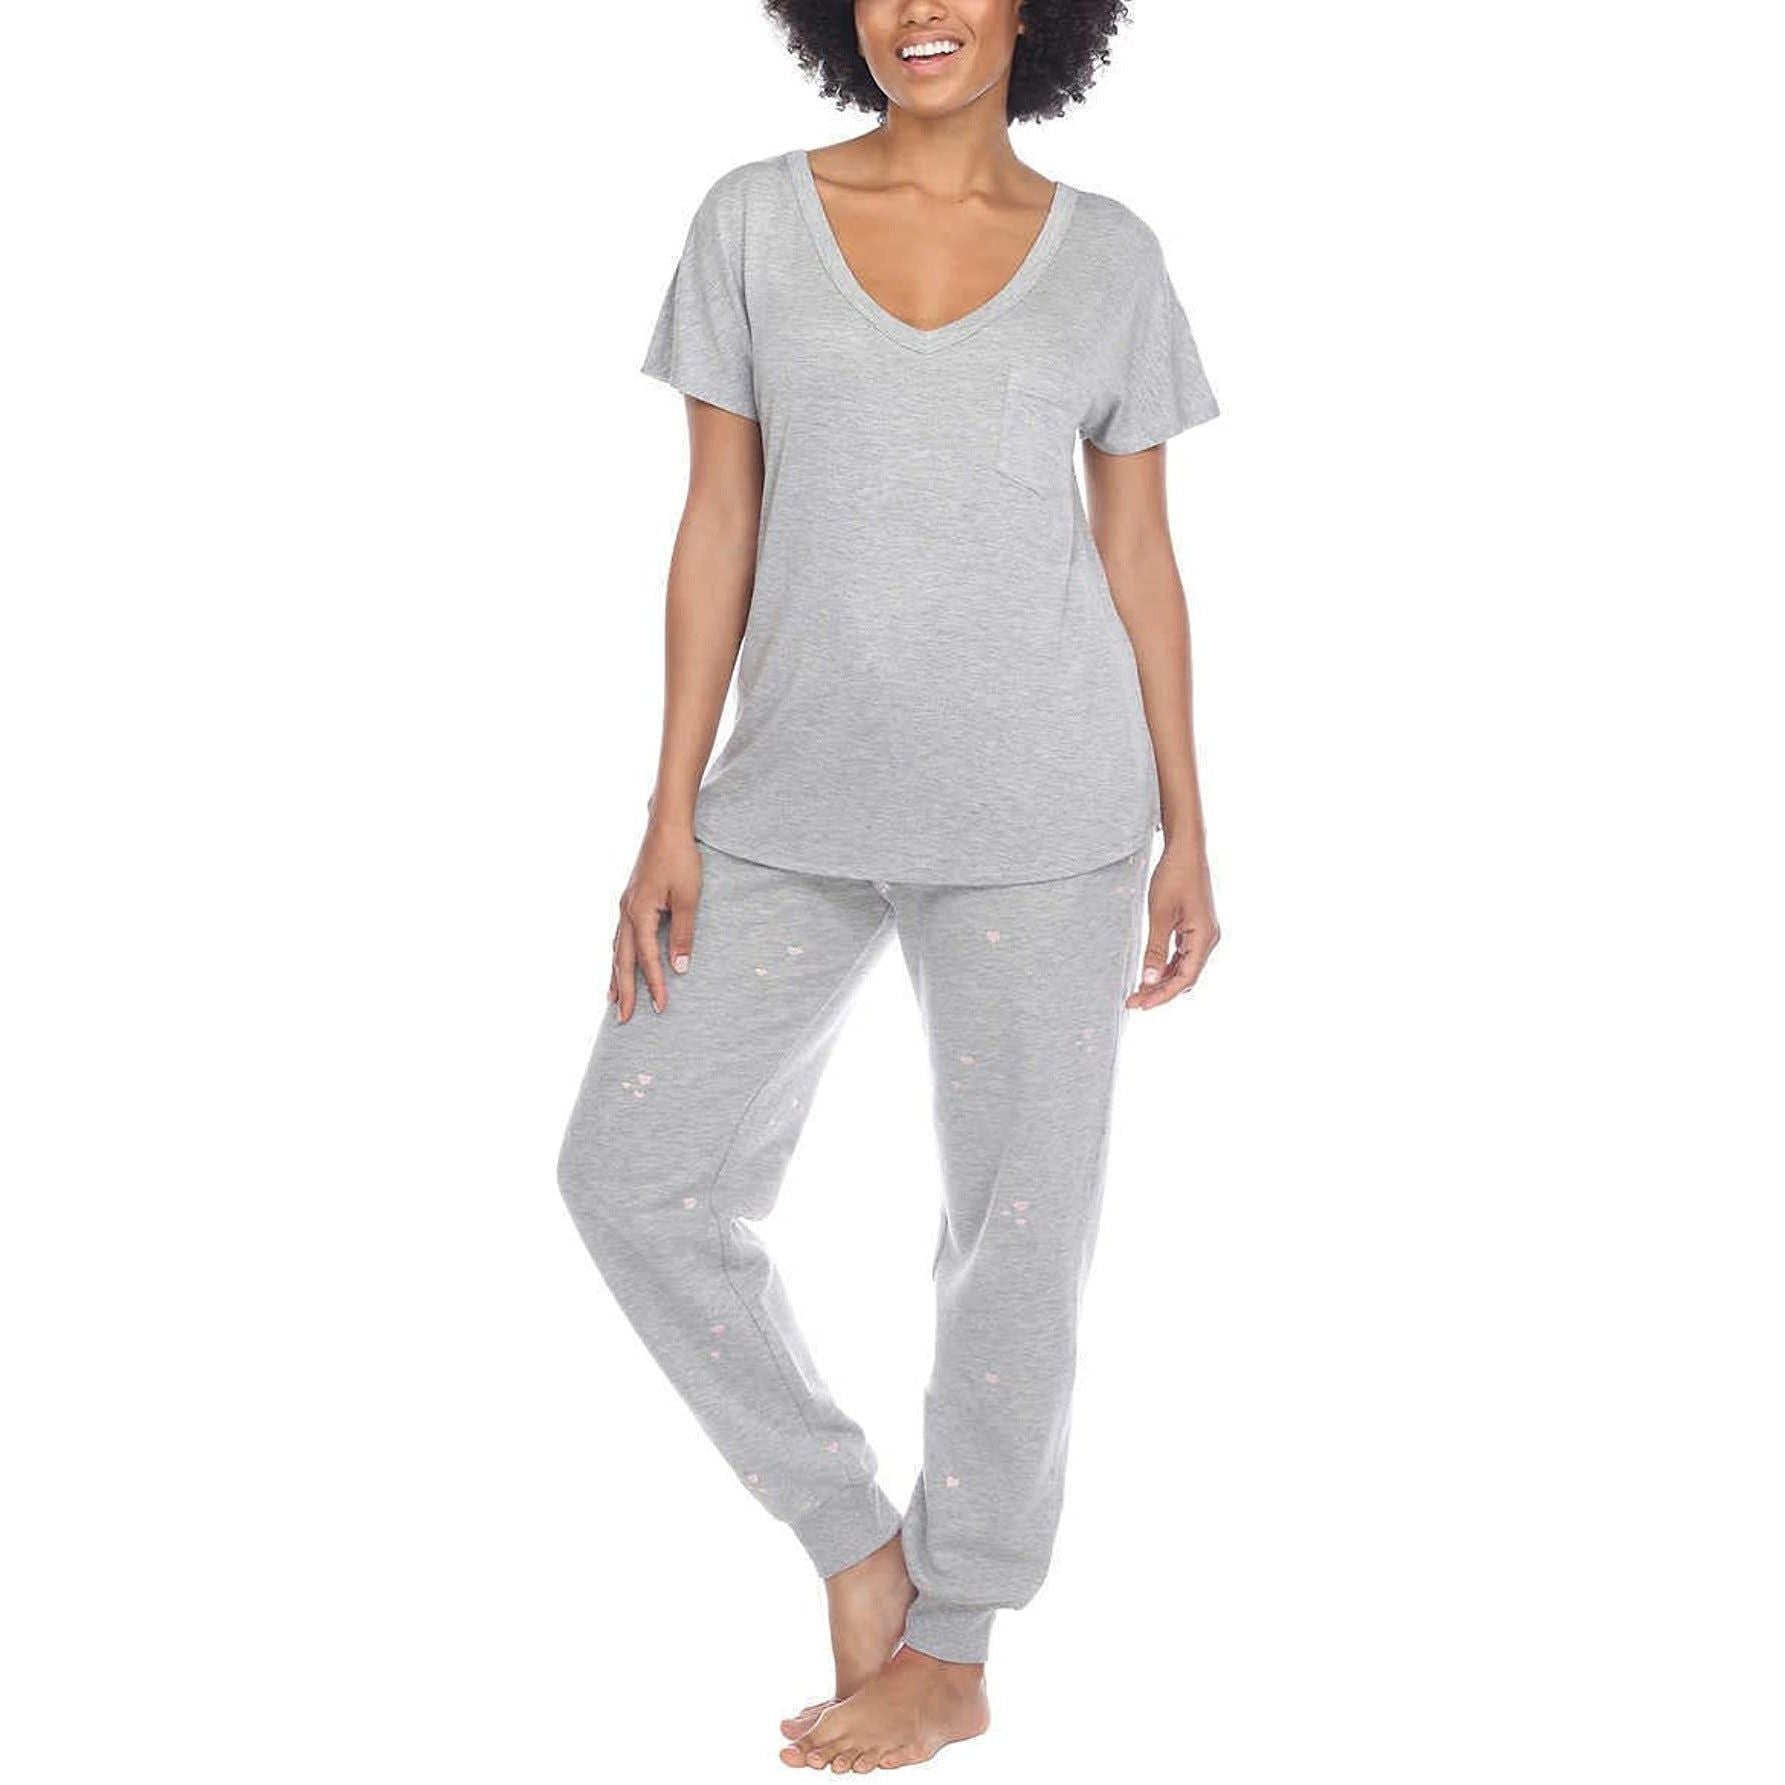 Honeydew Women's Super Soft Lounge Set - Ultimate Comfort and Style!